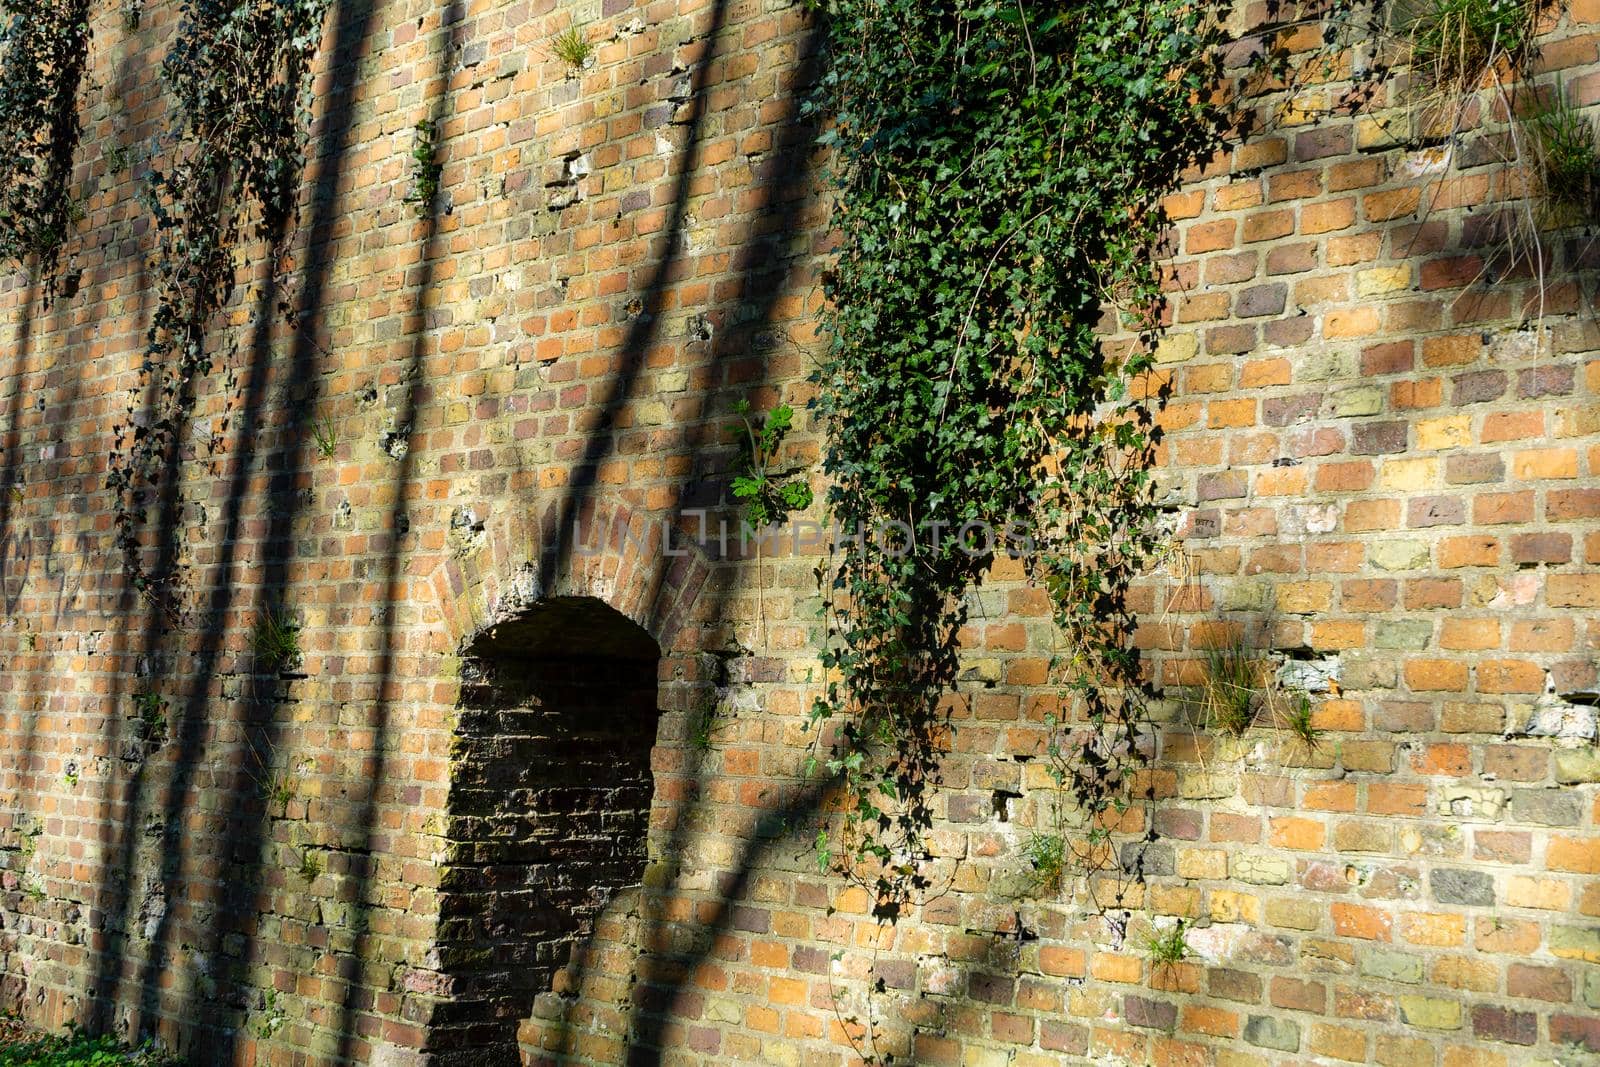 The old brick wall of the fortress covered with ivy The plant that grew on the brick wall by paca-waca